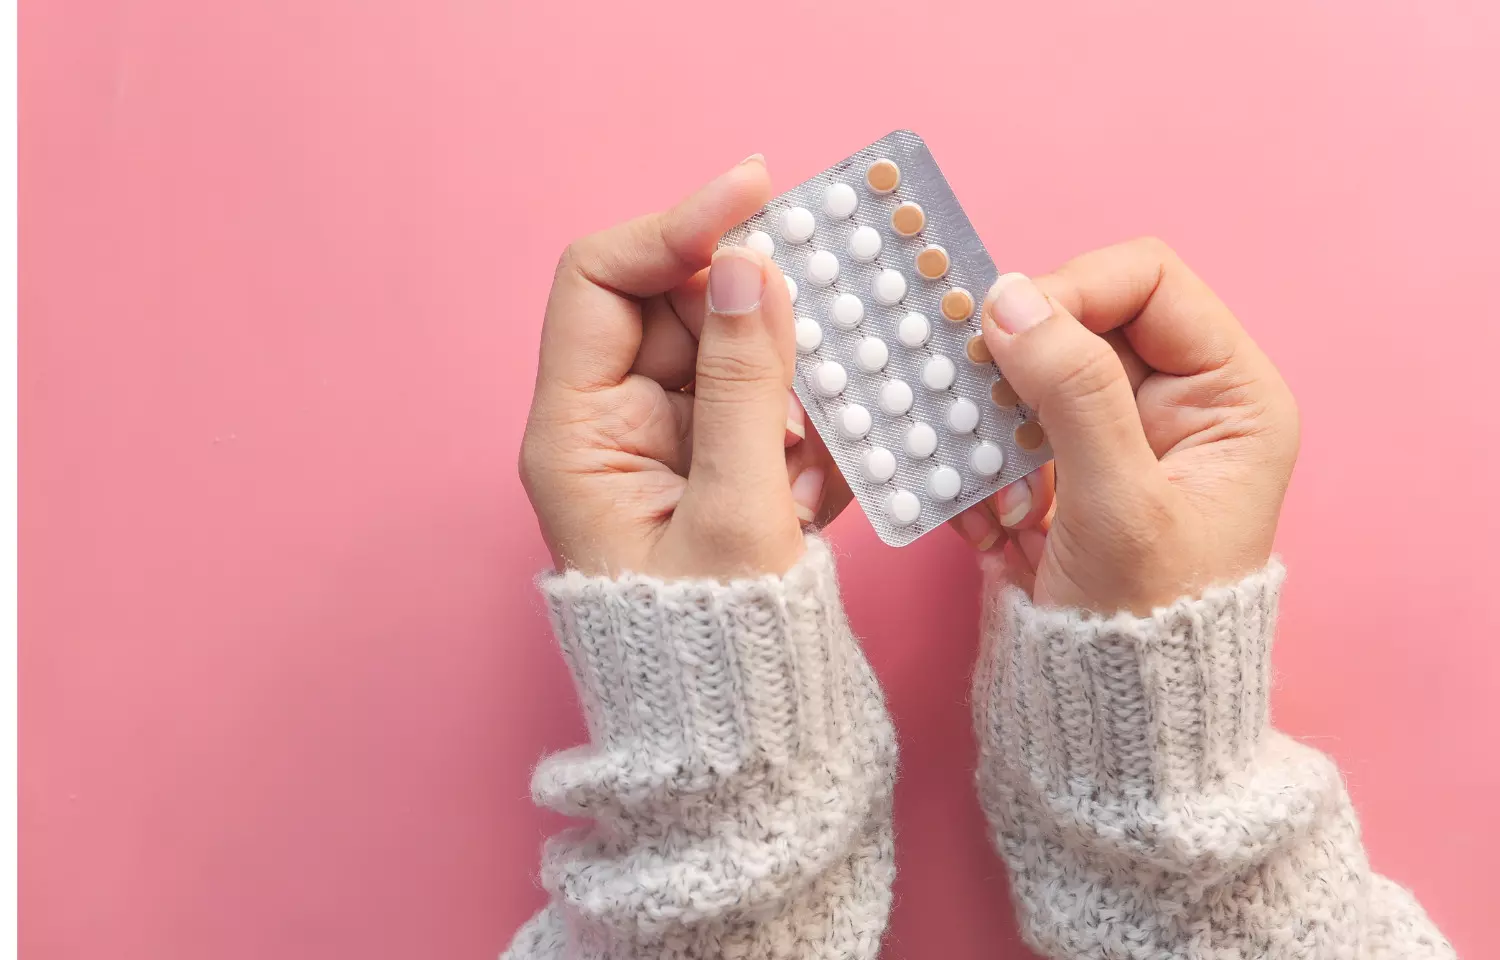 Permanent birth control methods for women have up to six percent failure rates